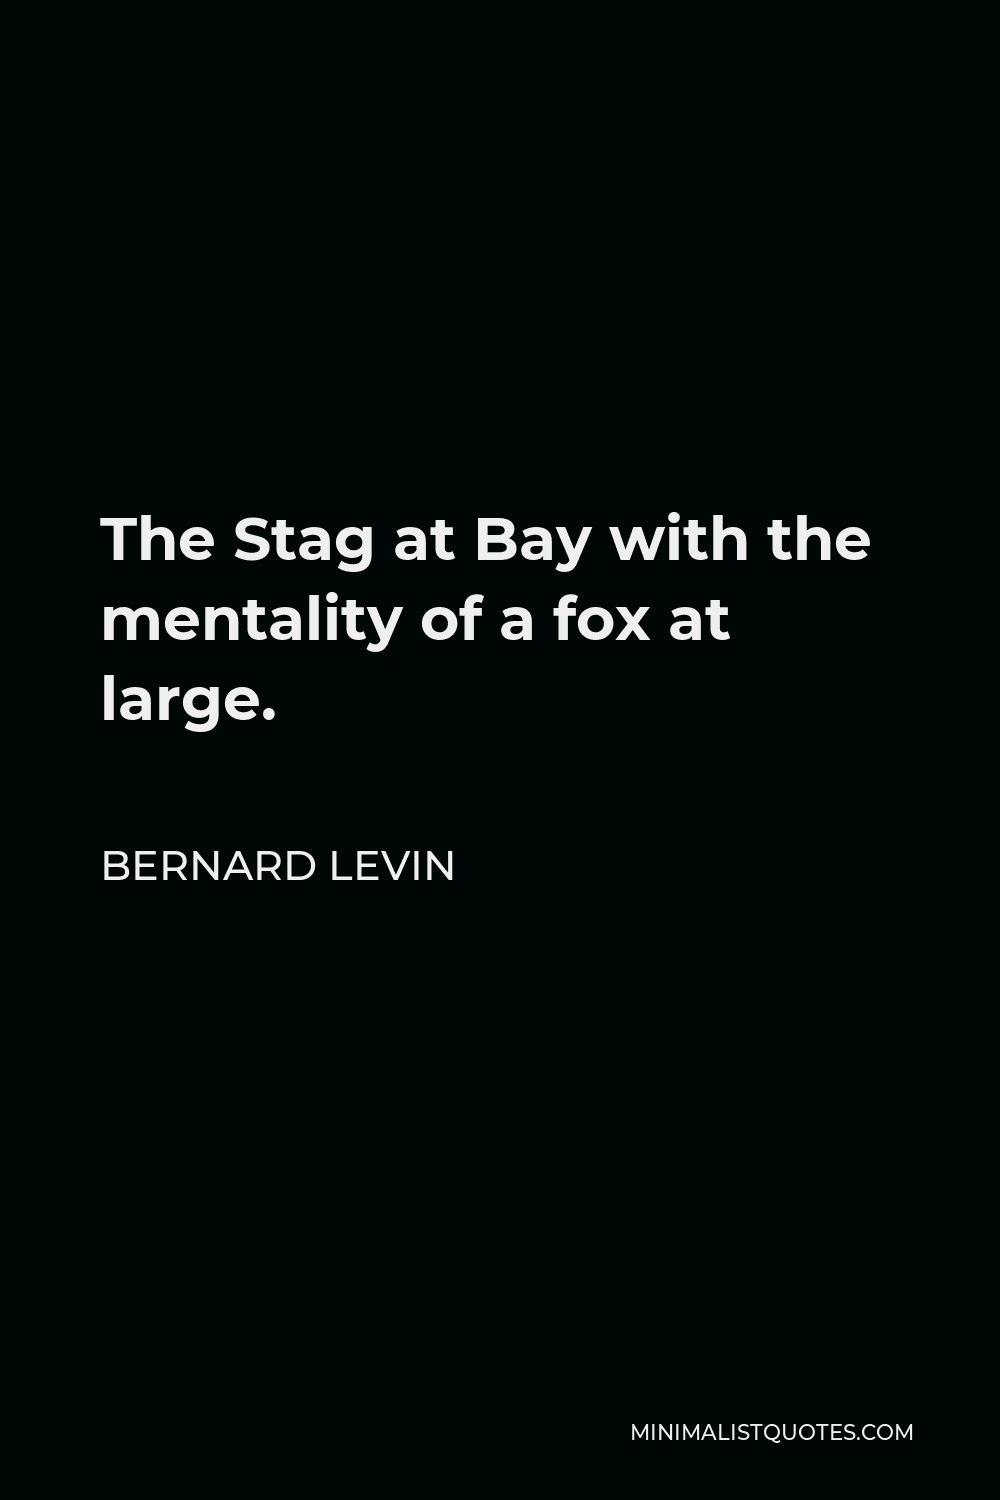 Bernard Levin Quote - The Stag at Bay with the mentality of a fox at large.